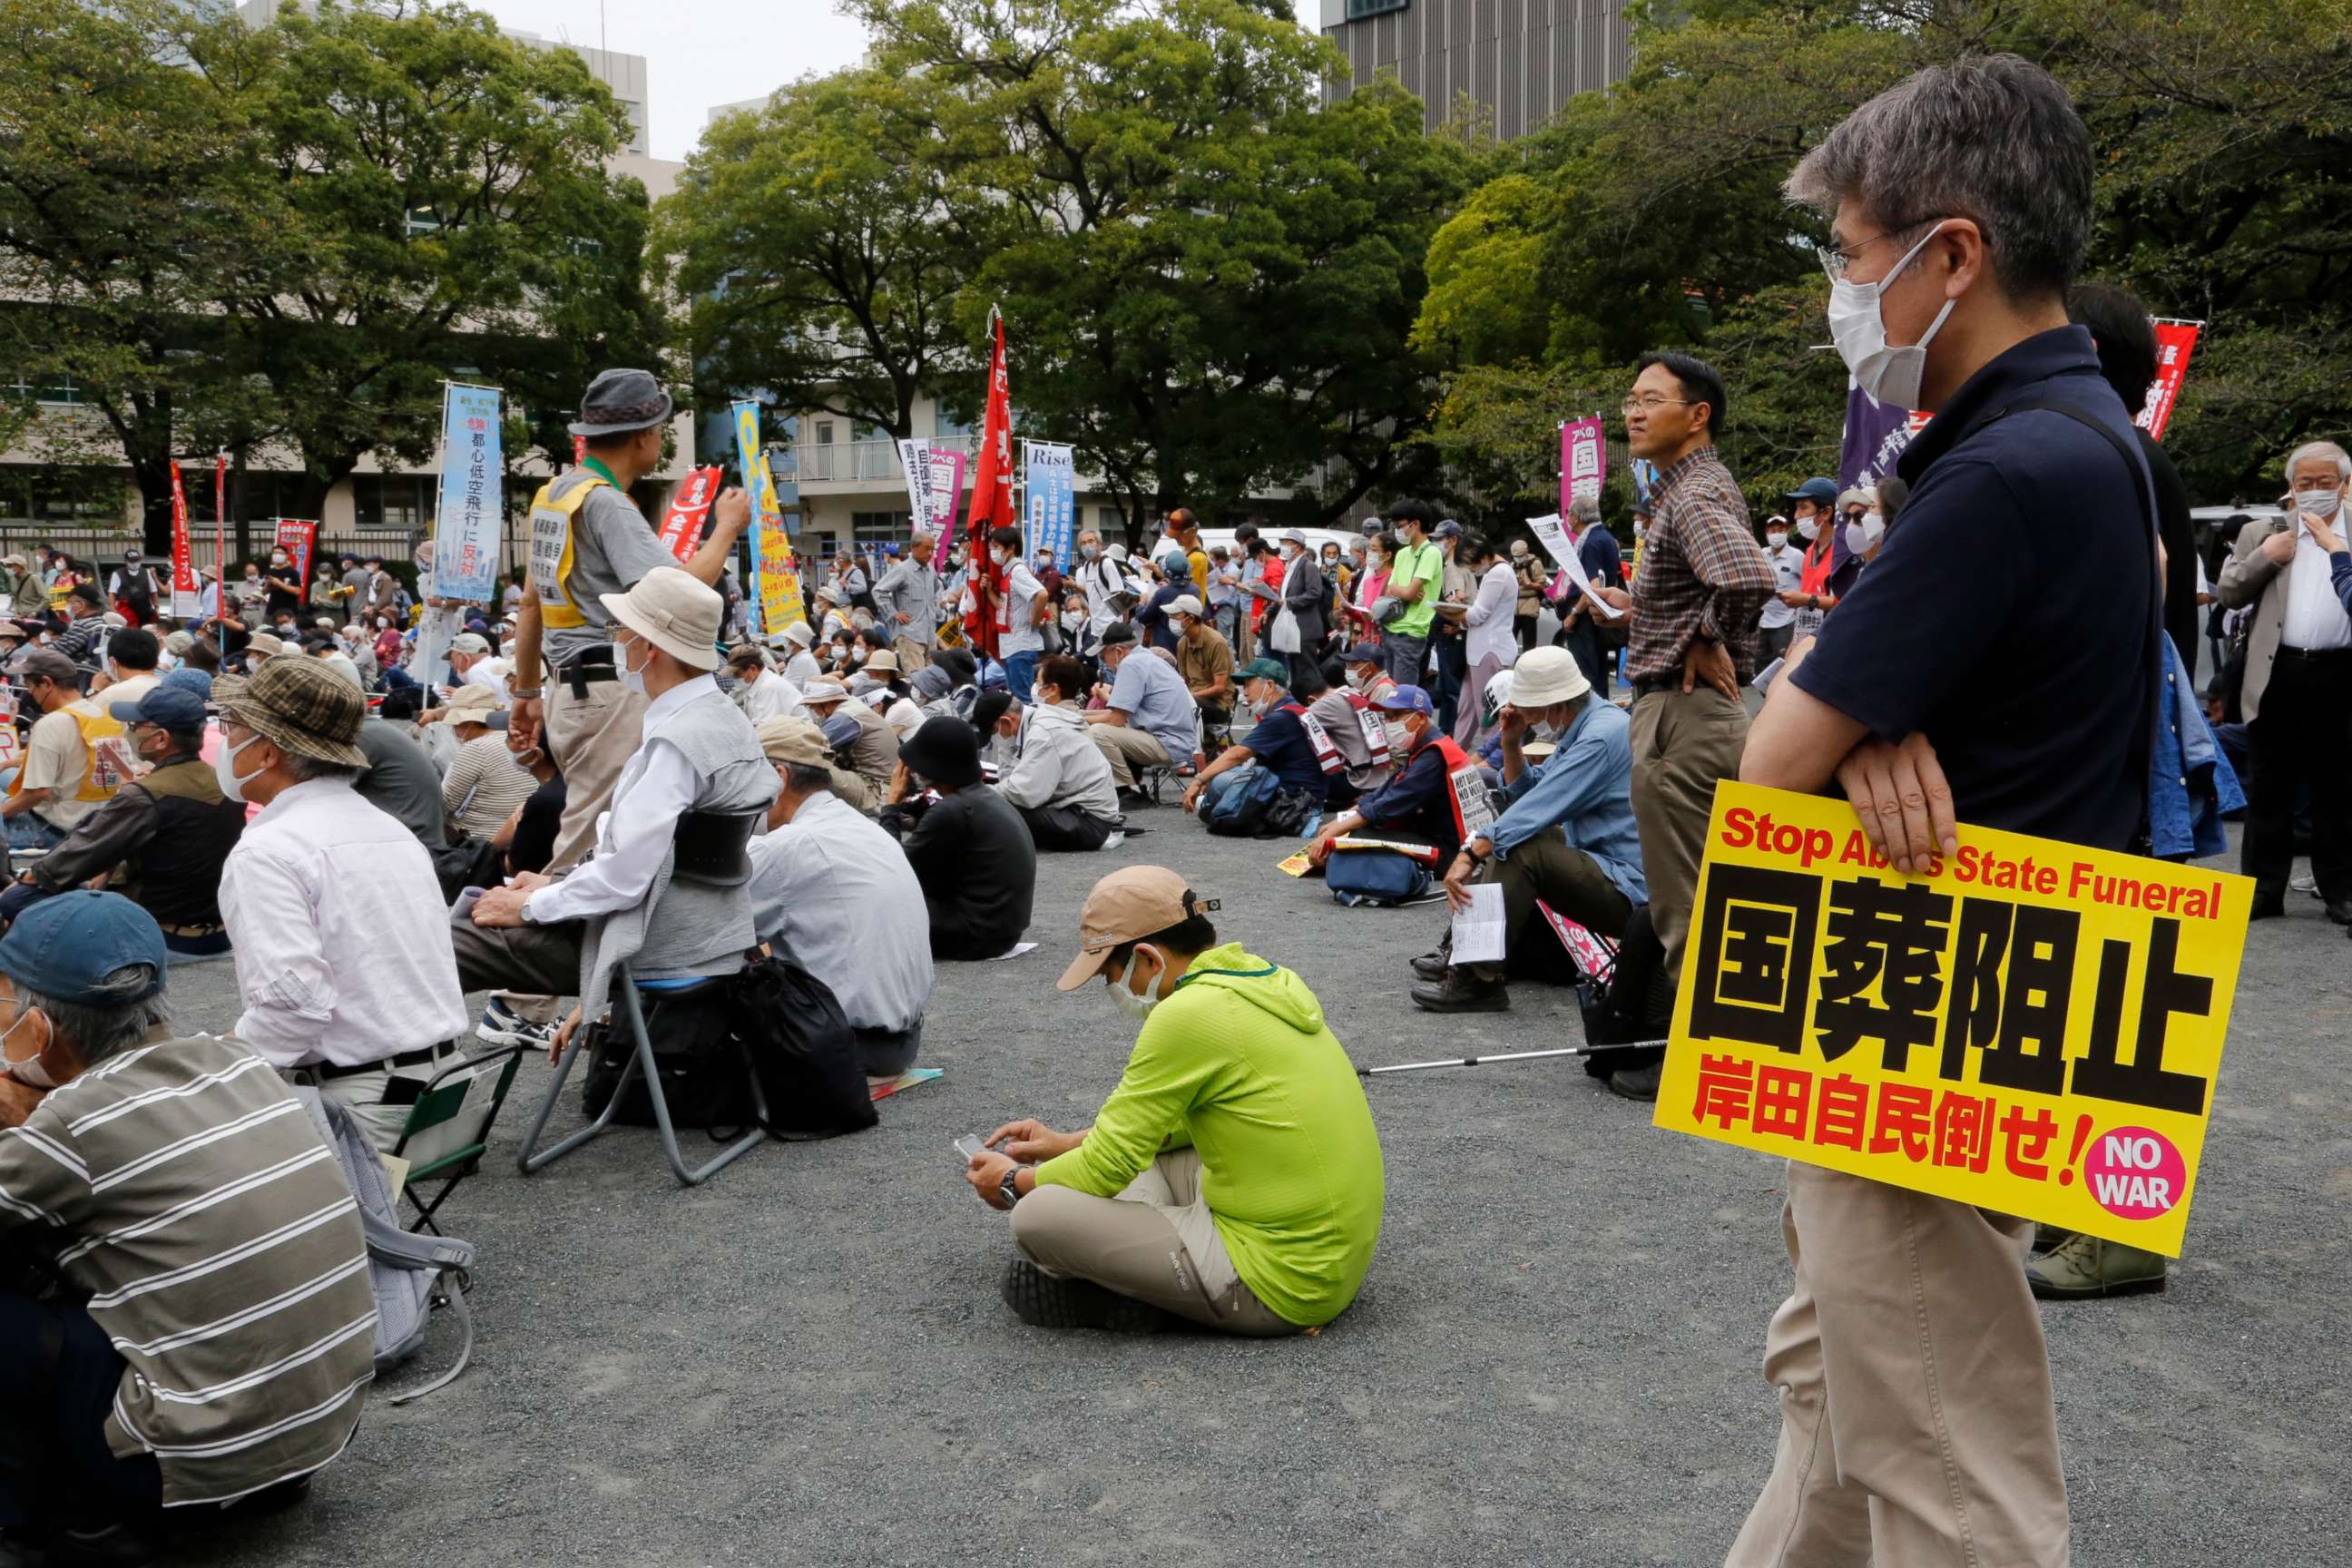 PHOTO: Protesters gather a park in Tokyo on Sept. 23, 2022, to demand the cancellation of former Japanese Prime Minister Shinzo Abe's state funeral.